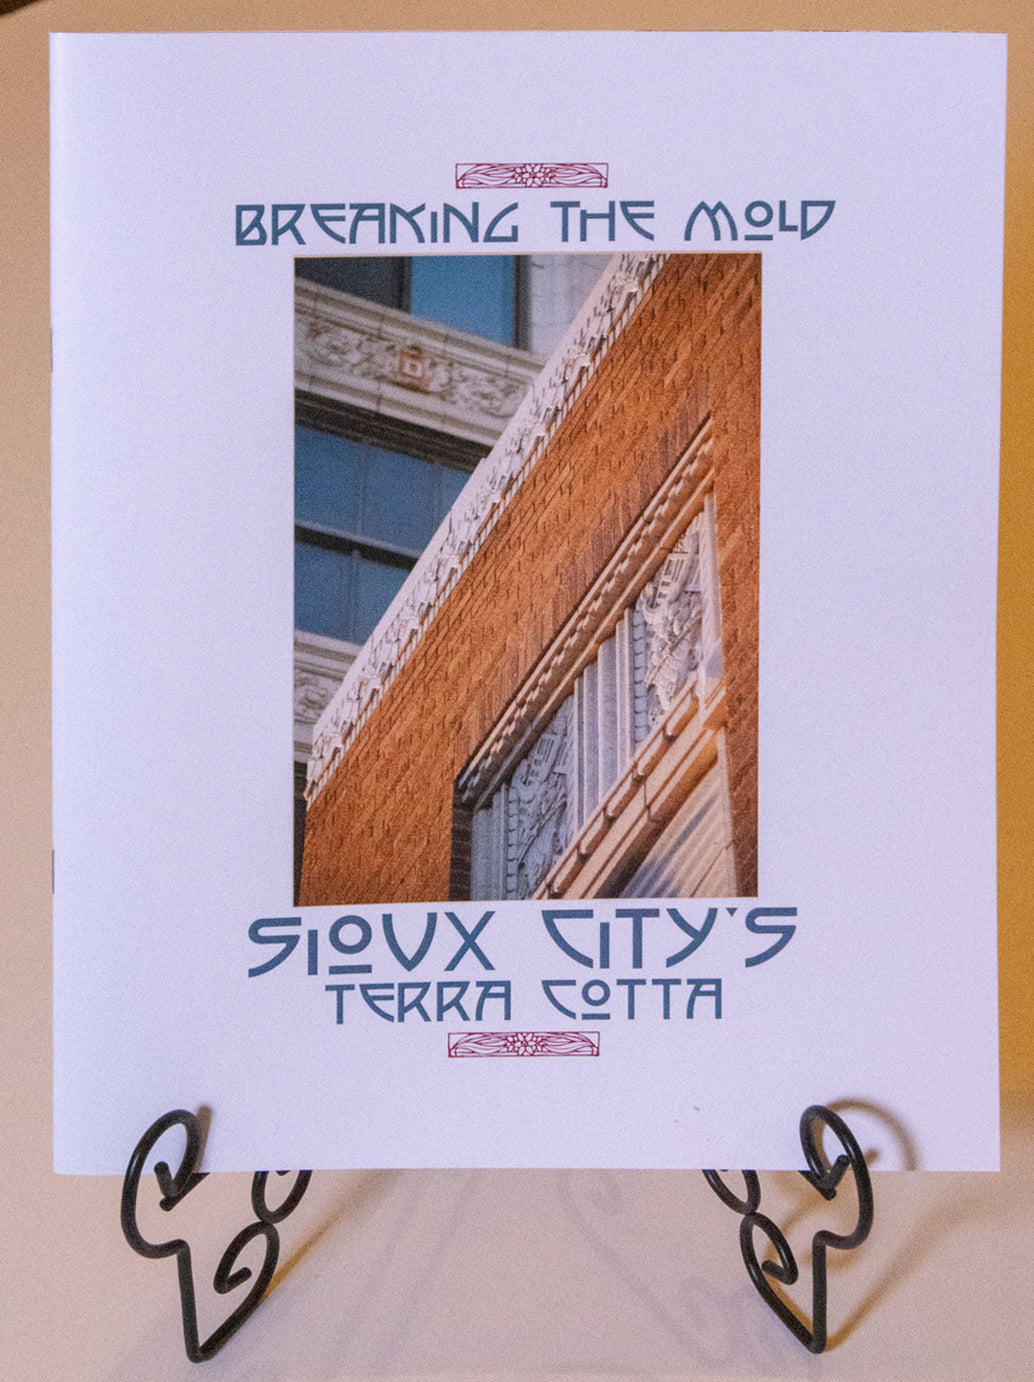 Breaking the Mold - Sioux City's Terra Cotta Book